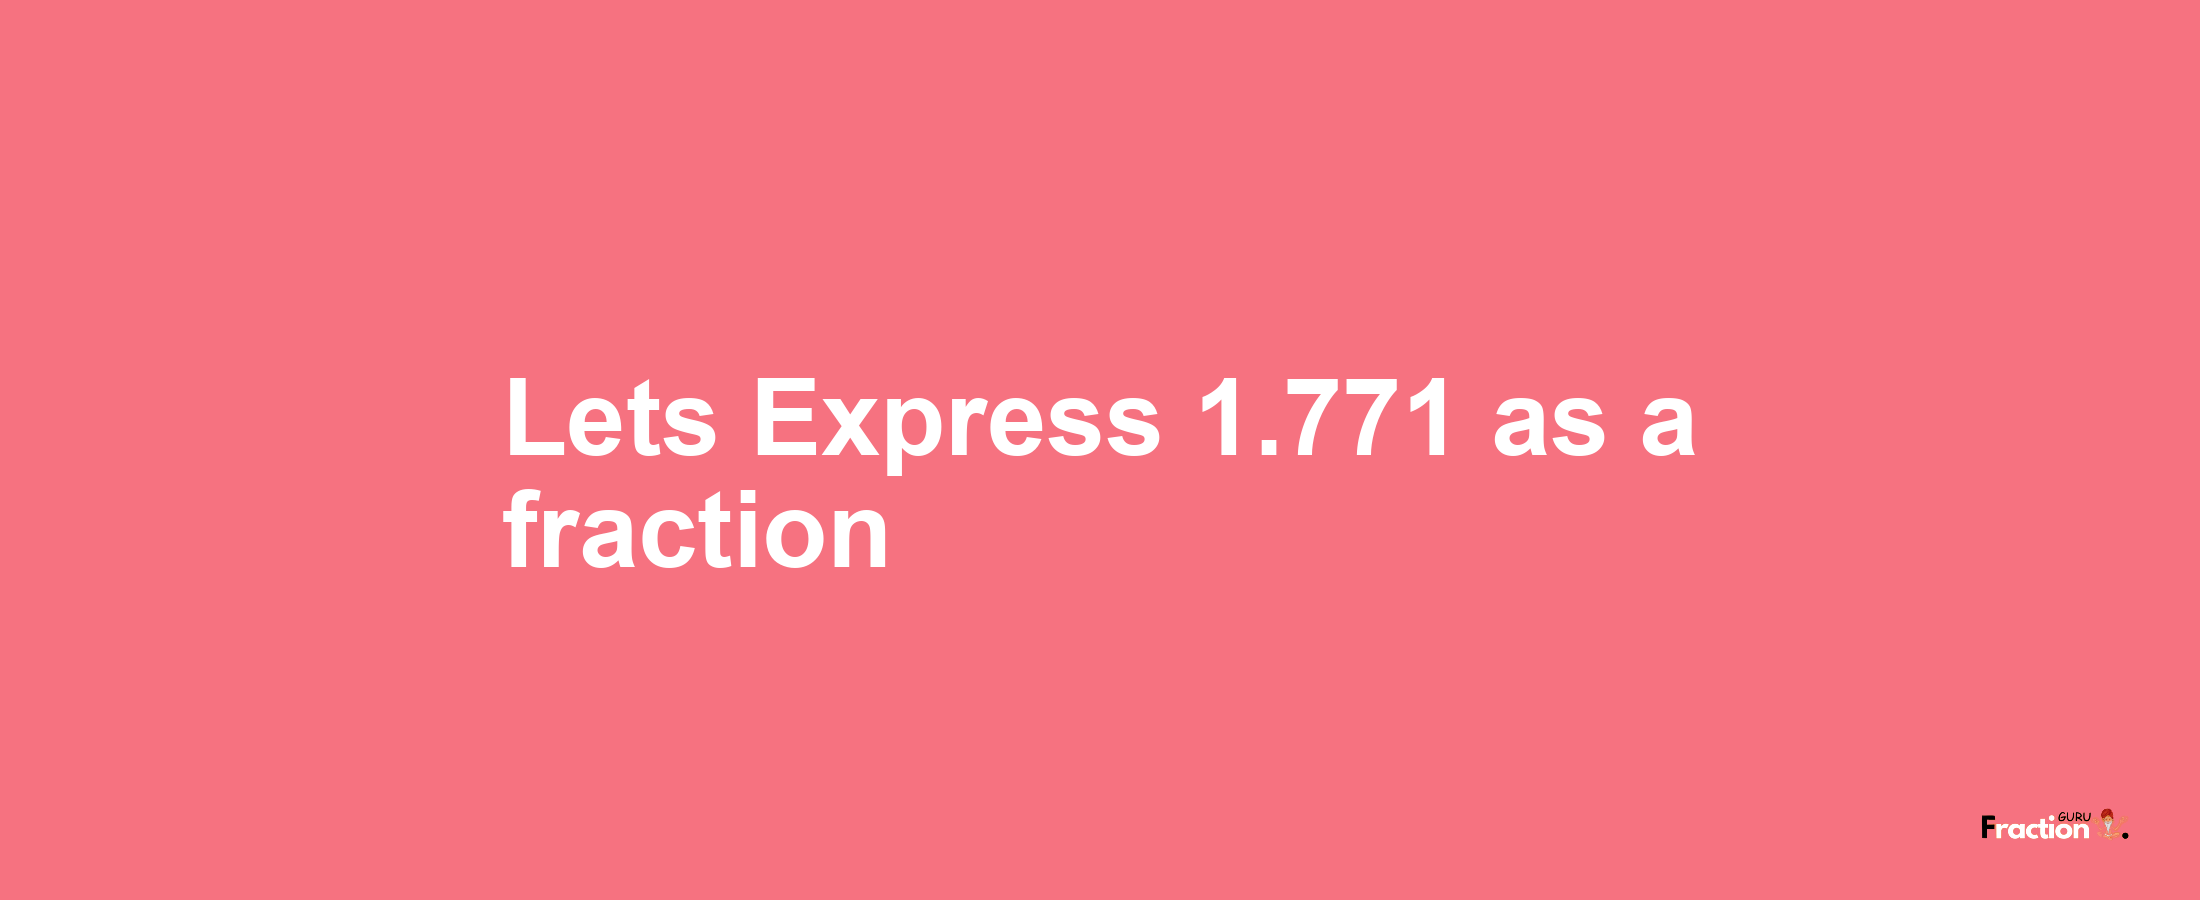 Lets Express 1.771 as afraction